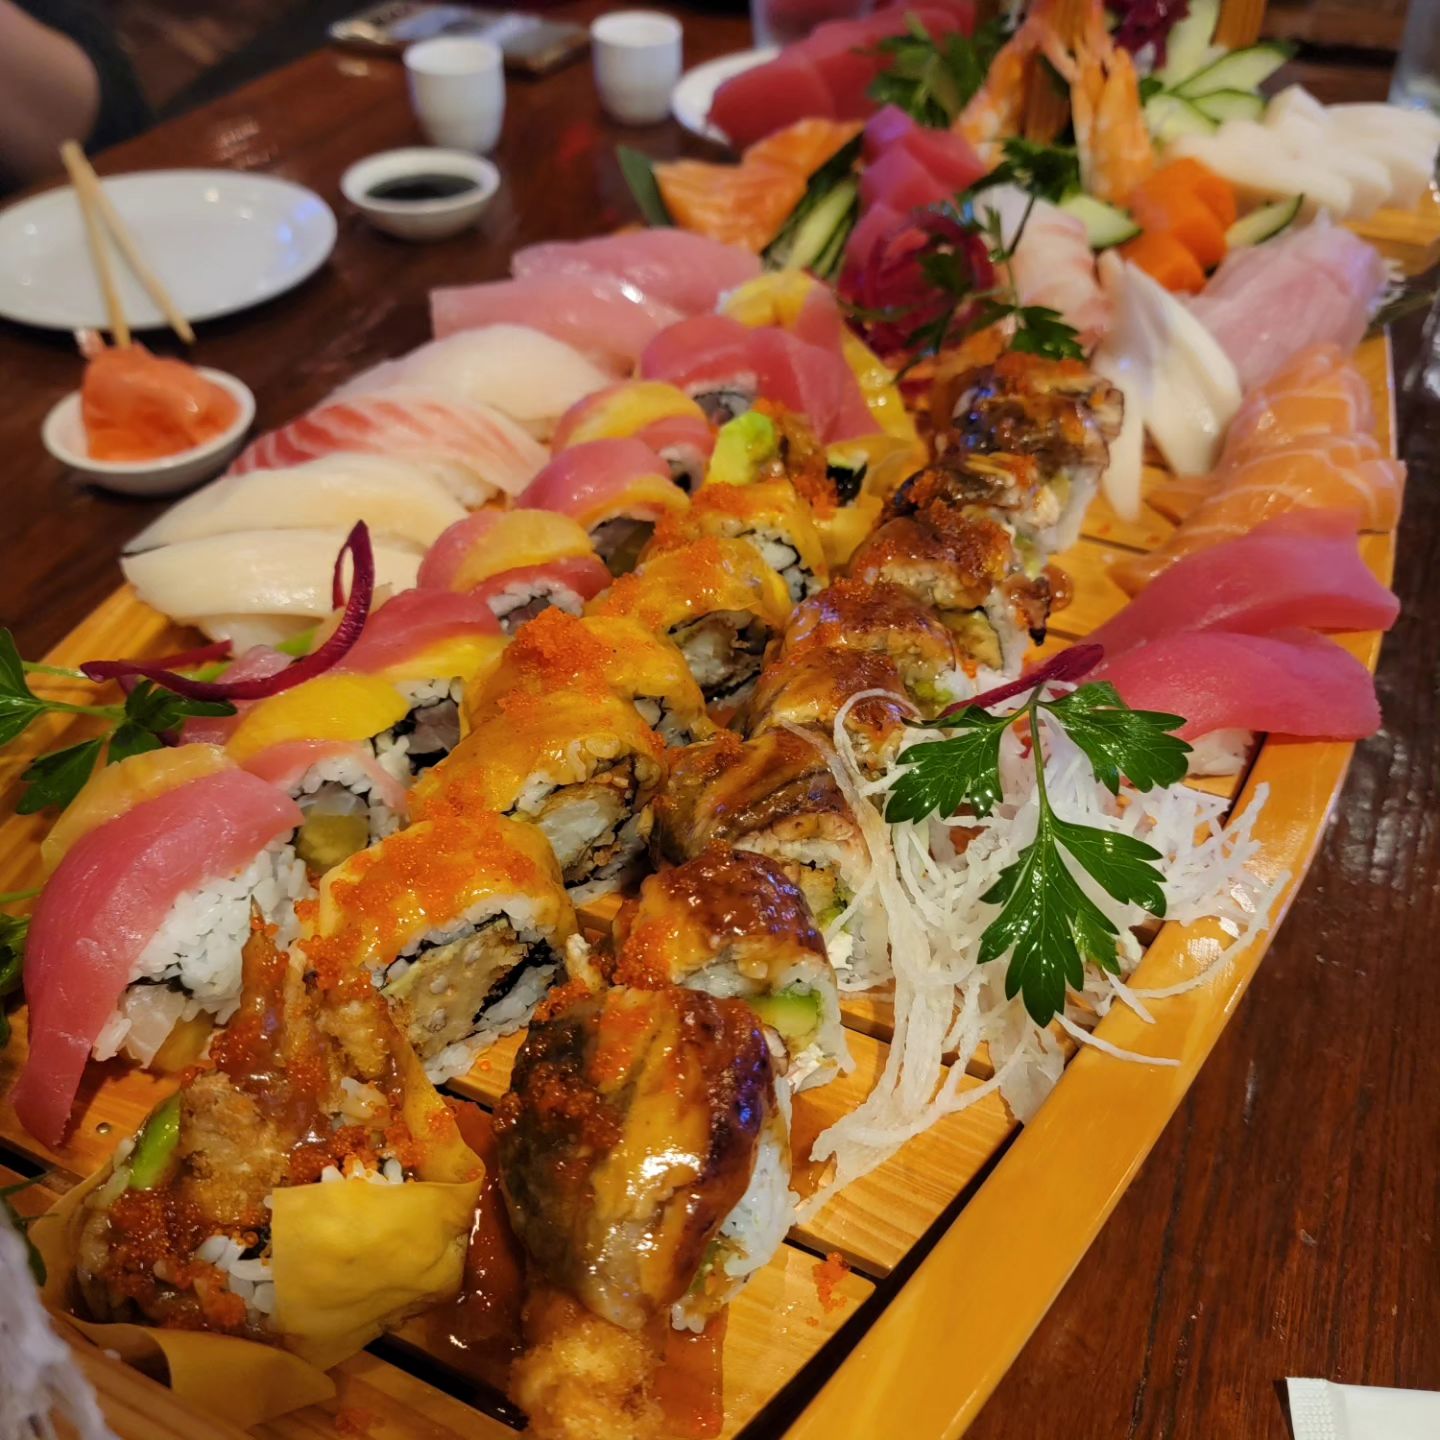 Now that's a boatload of sushi!!!